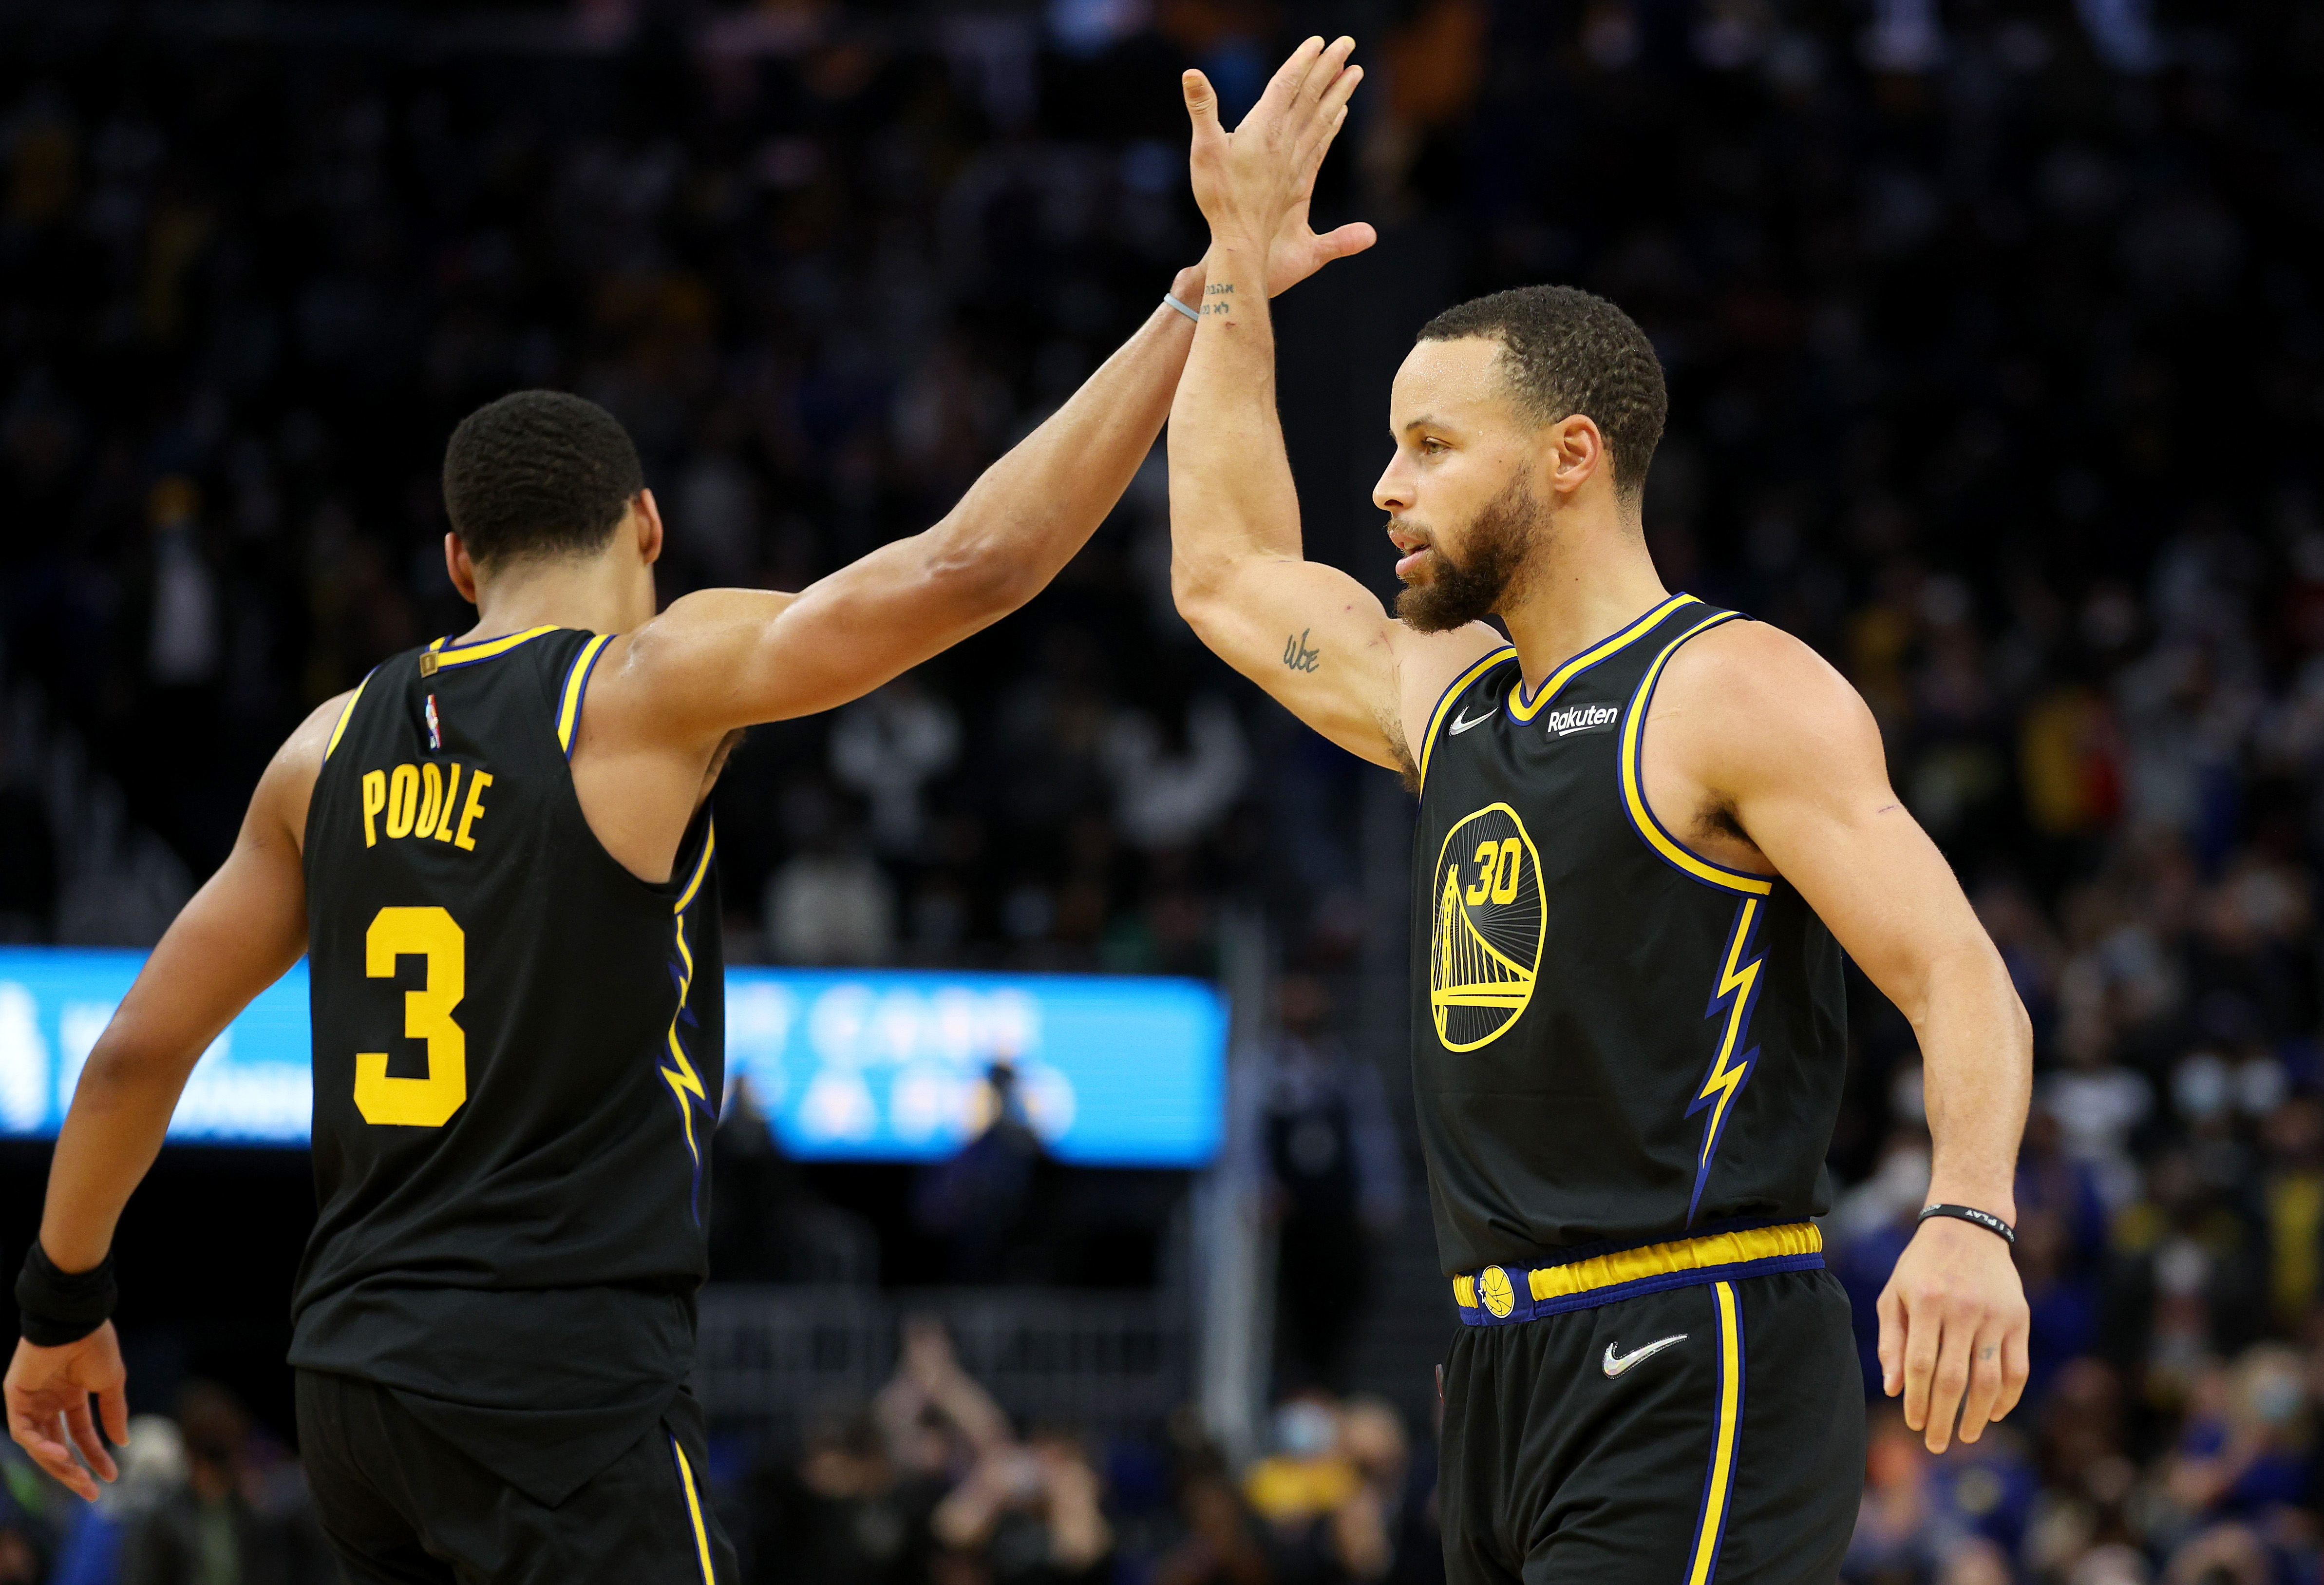 Warriors guard Stephen Curry high fives Jordan Poole during their game against the Heat.